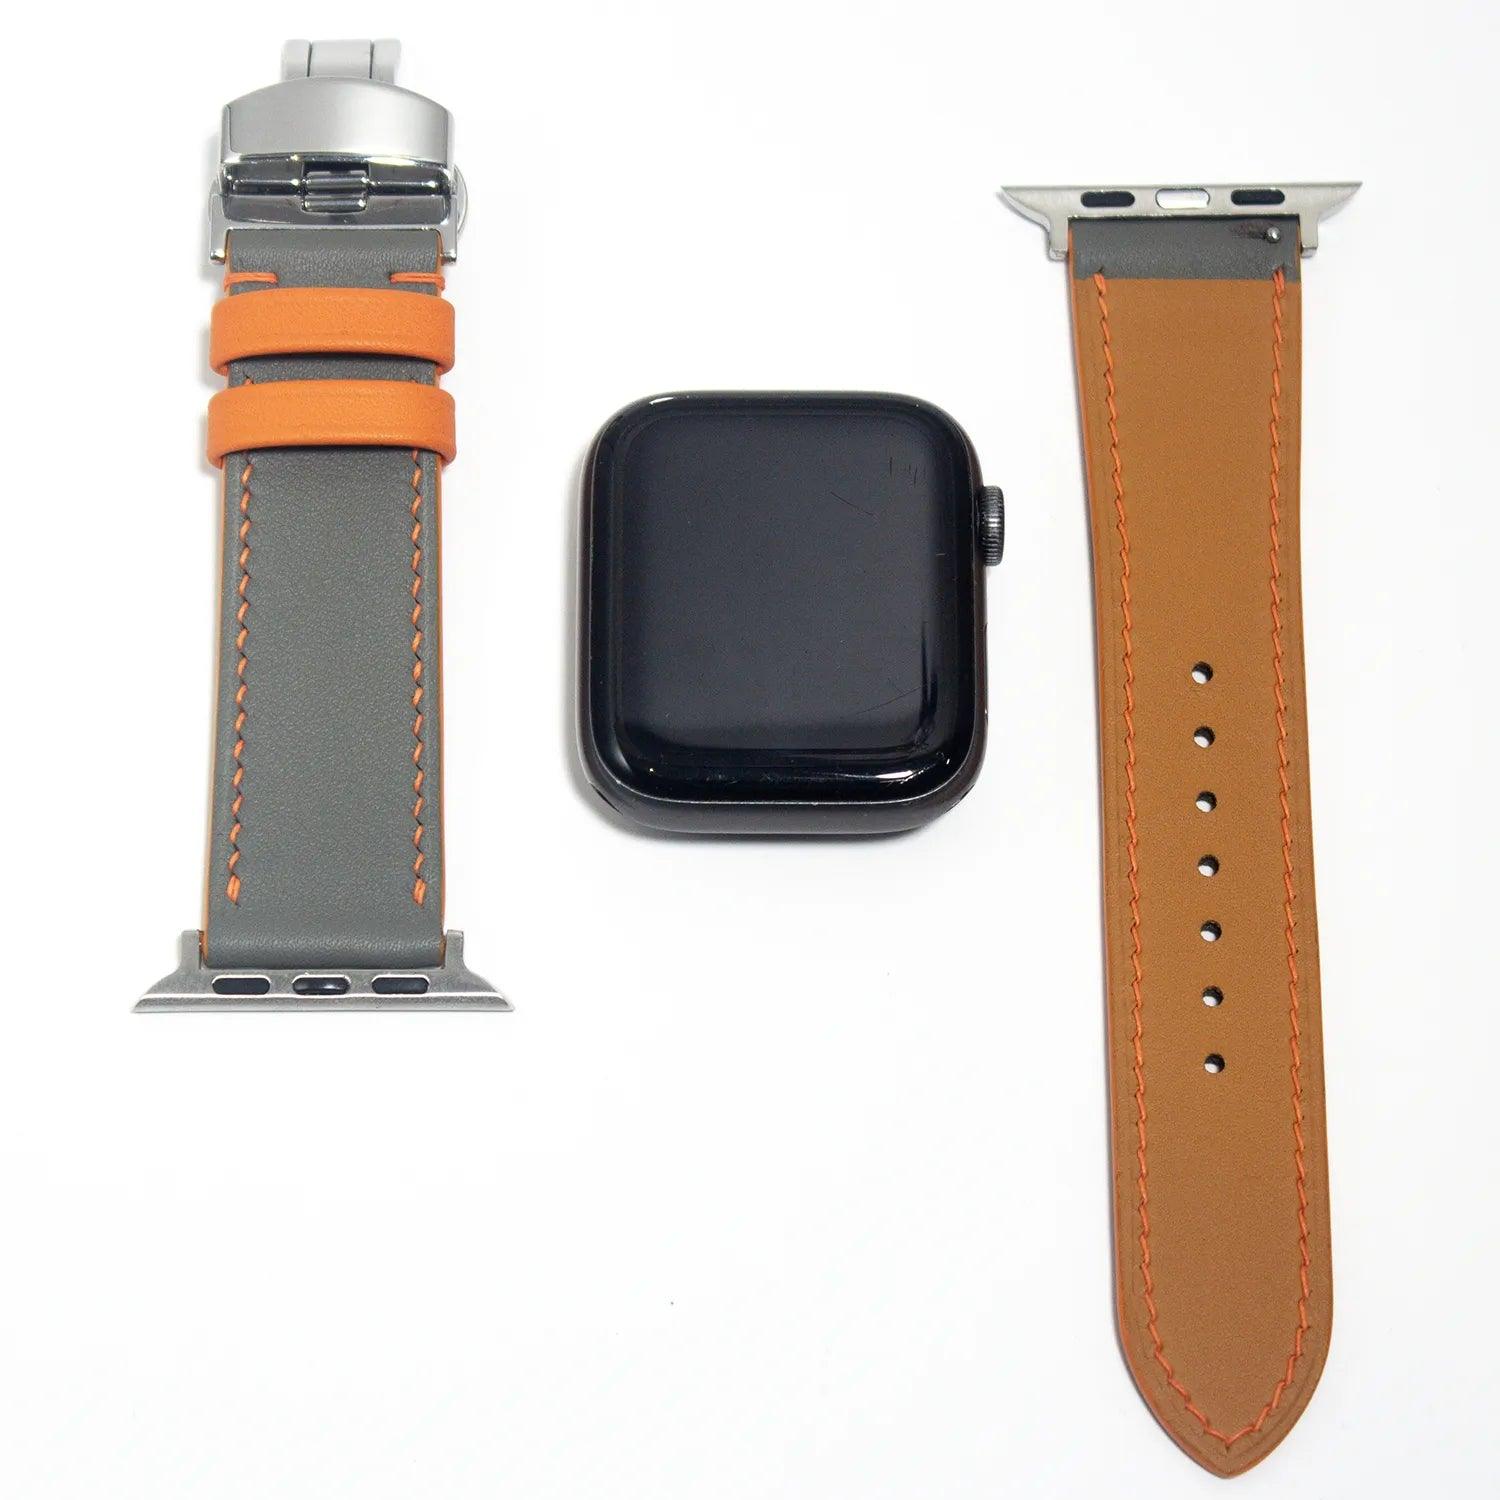 Durable leather watch straps in gray Swift leather, finished with bold orange stitching for added flair.